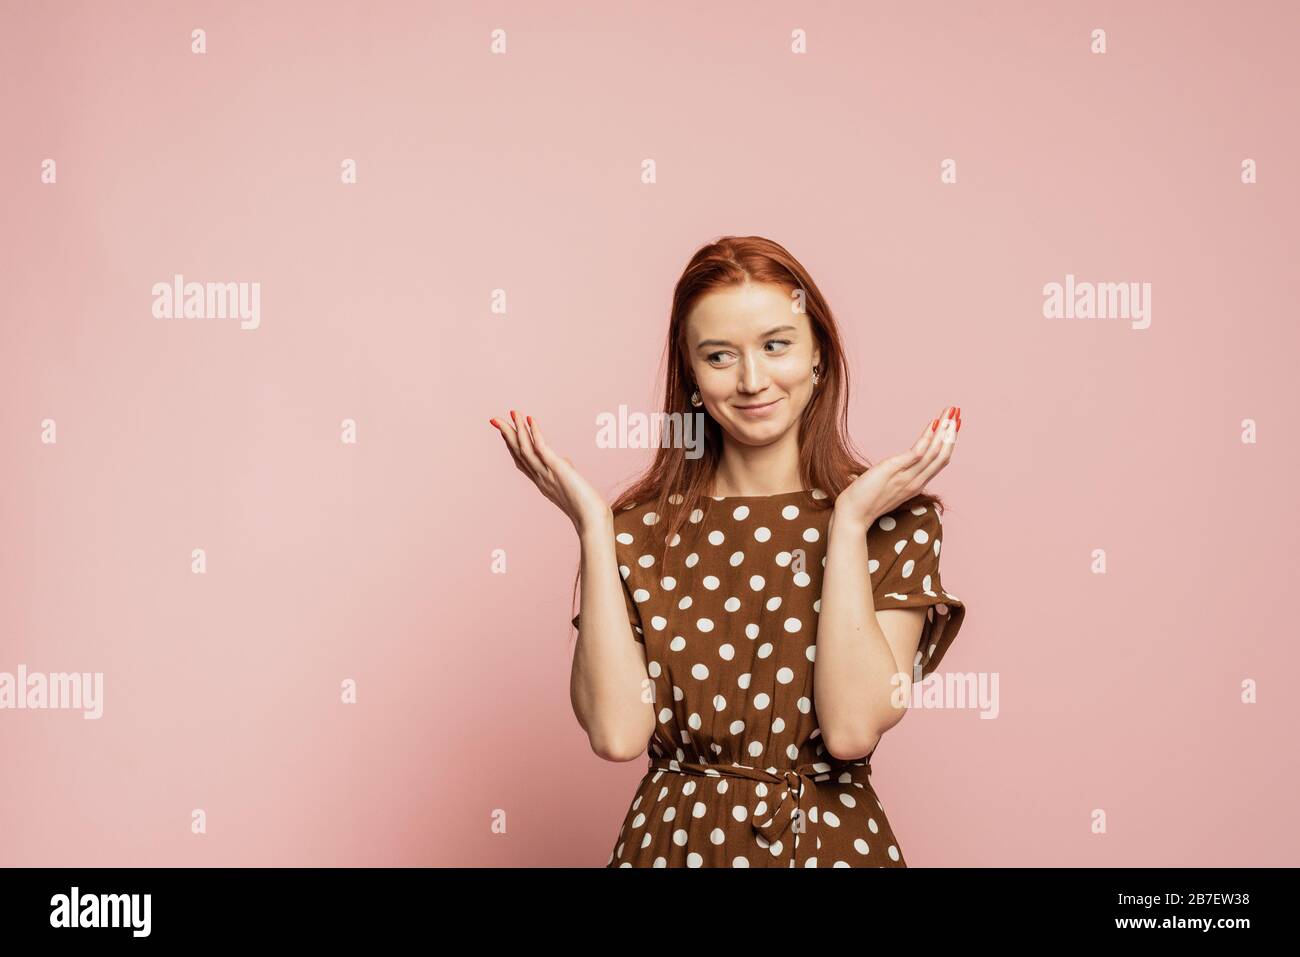 Confused and puzzled woman in the studio on a pink background. A girl in a beautiful brown dress shows the emotion of not understanding. I dont know. Stock Photo